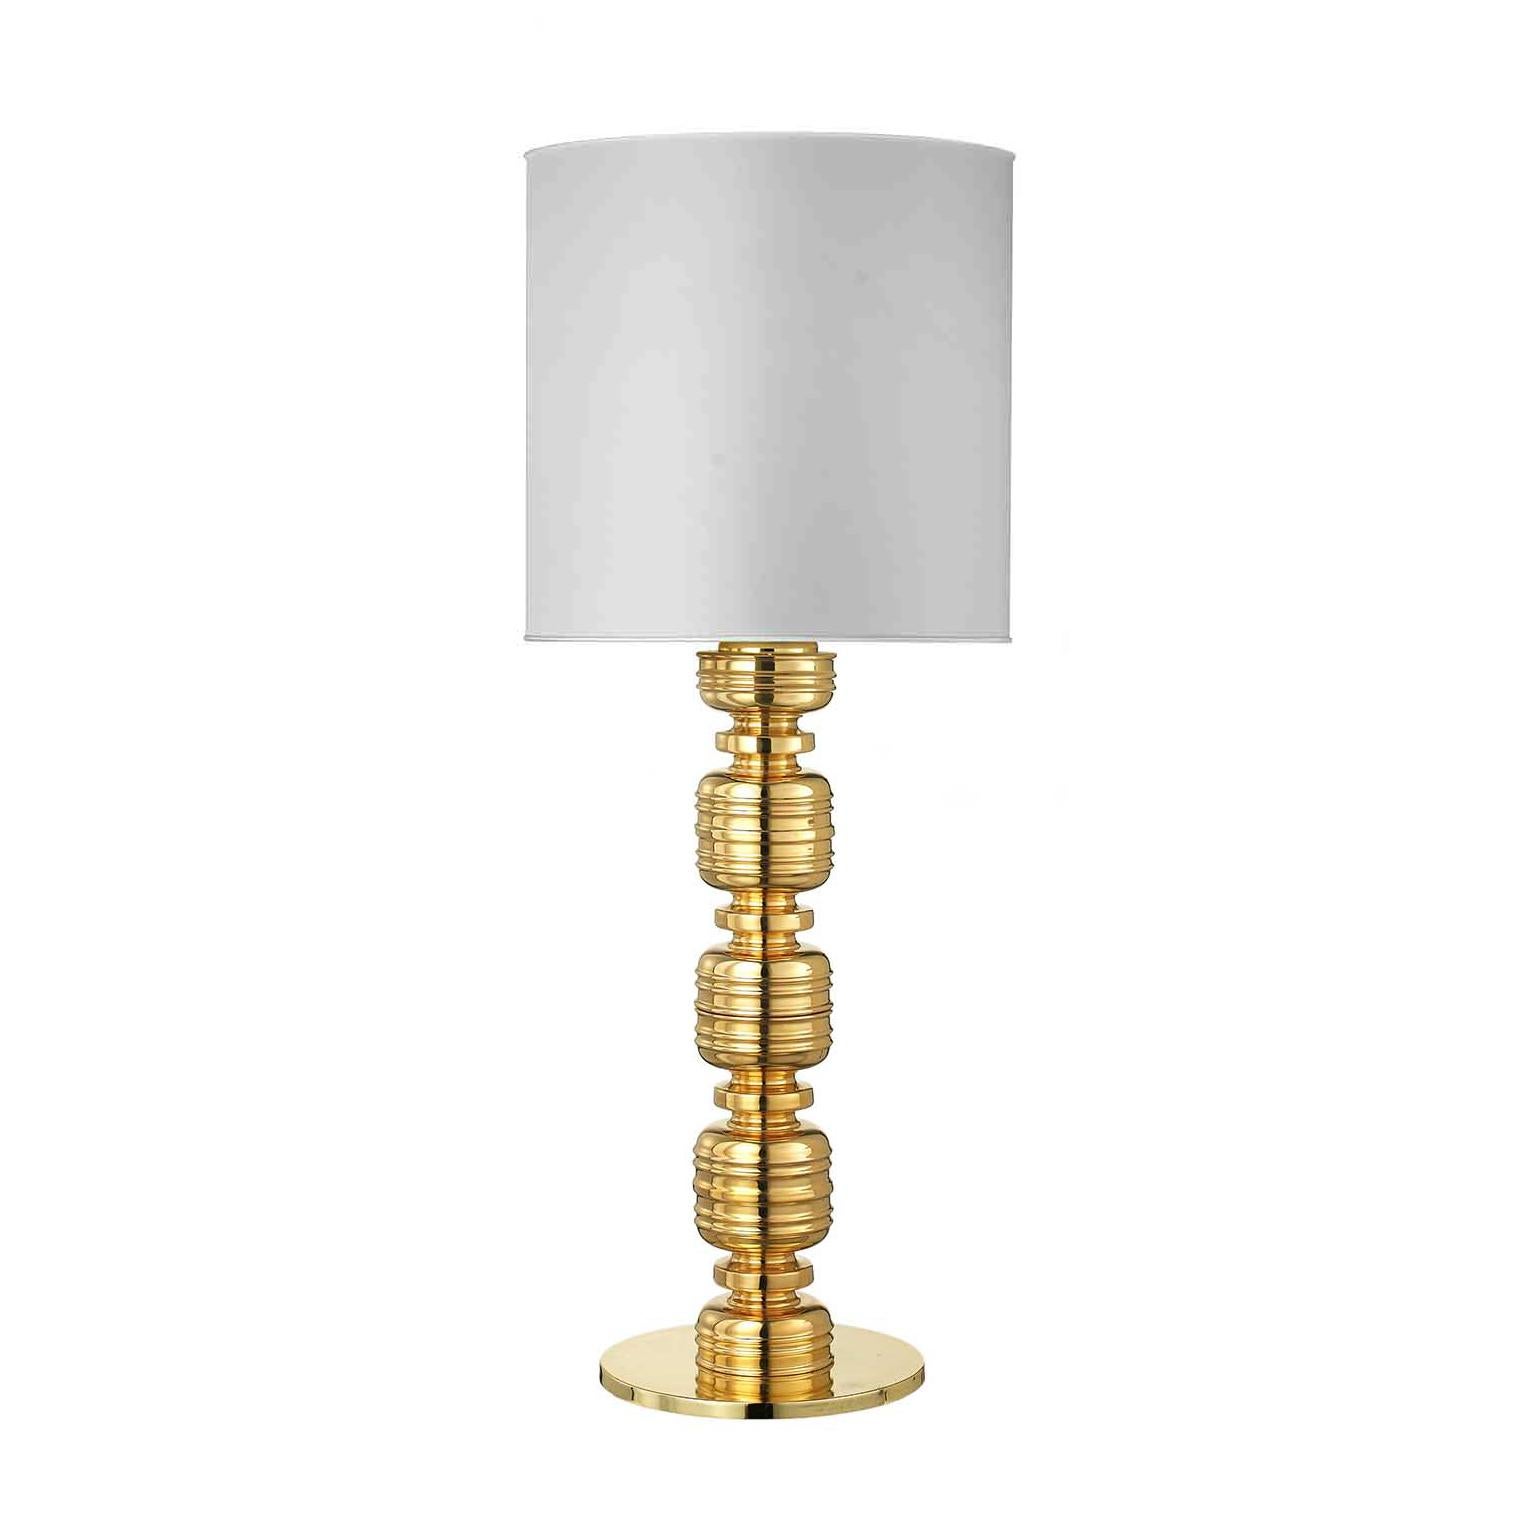 Hand-Crafted THEA 2, Ceramic Lamp Handcrafted in 24-Karat Gold by Gabriella B. Made in Italy For Sale